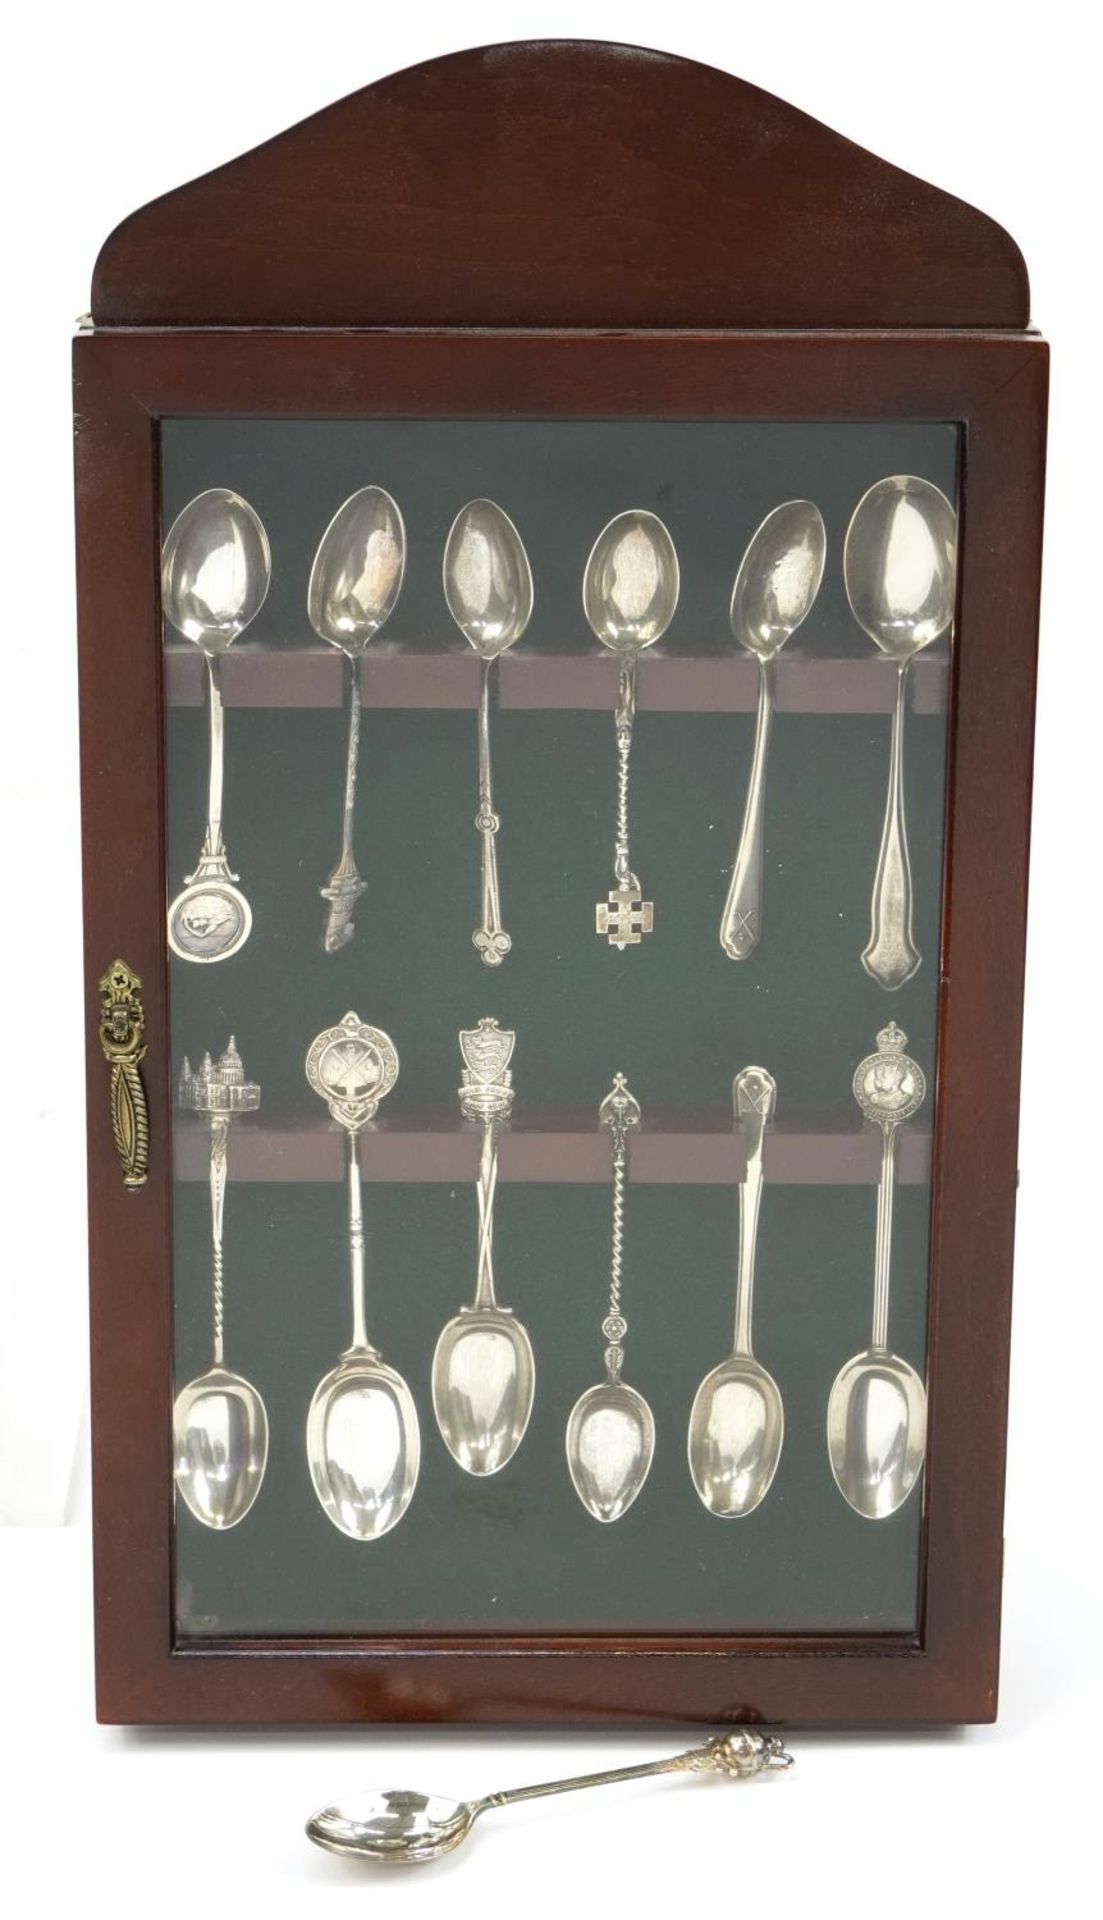 Thirteen silver sporting and souvenir teaspoons housed in a mahogany display case, the largest 12.